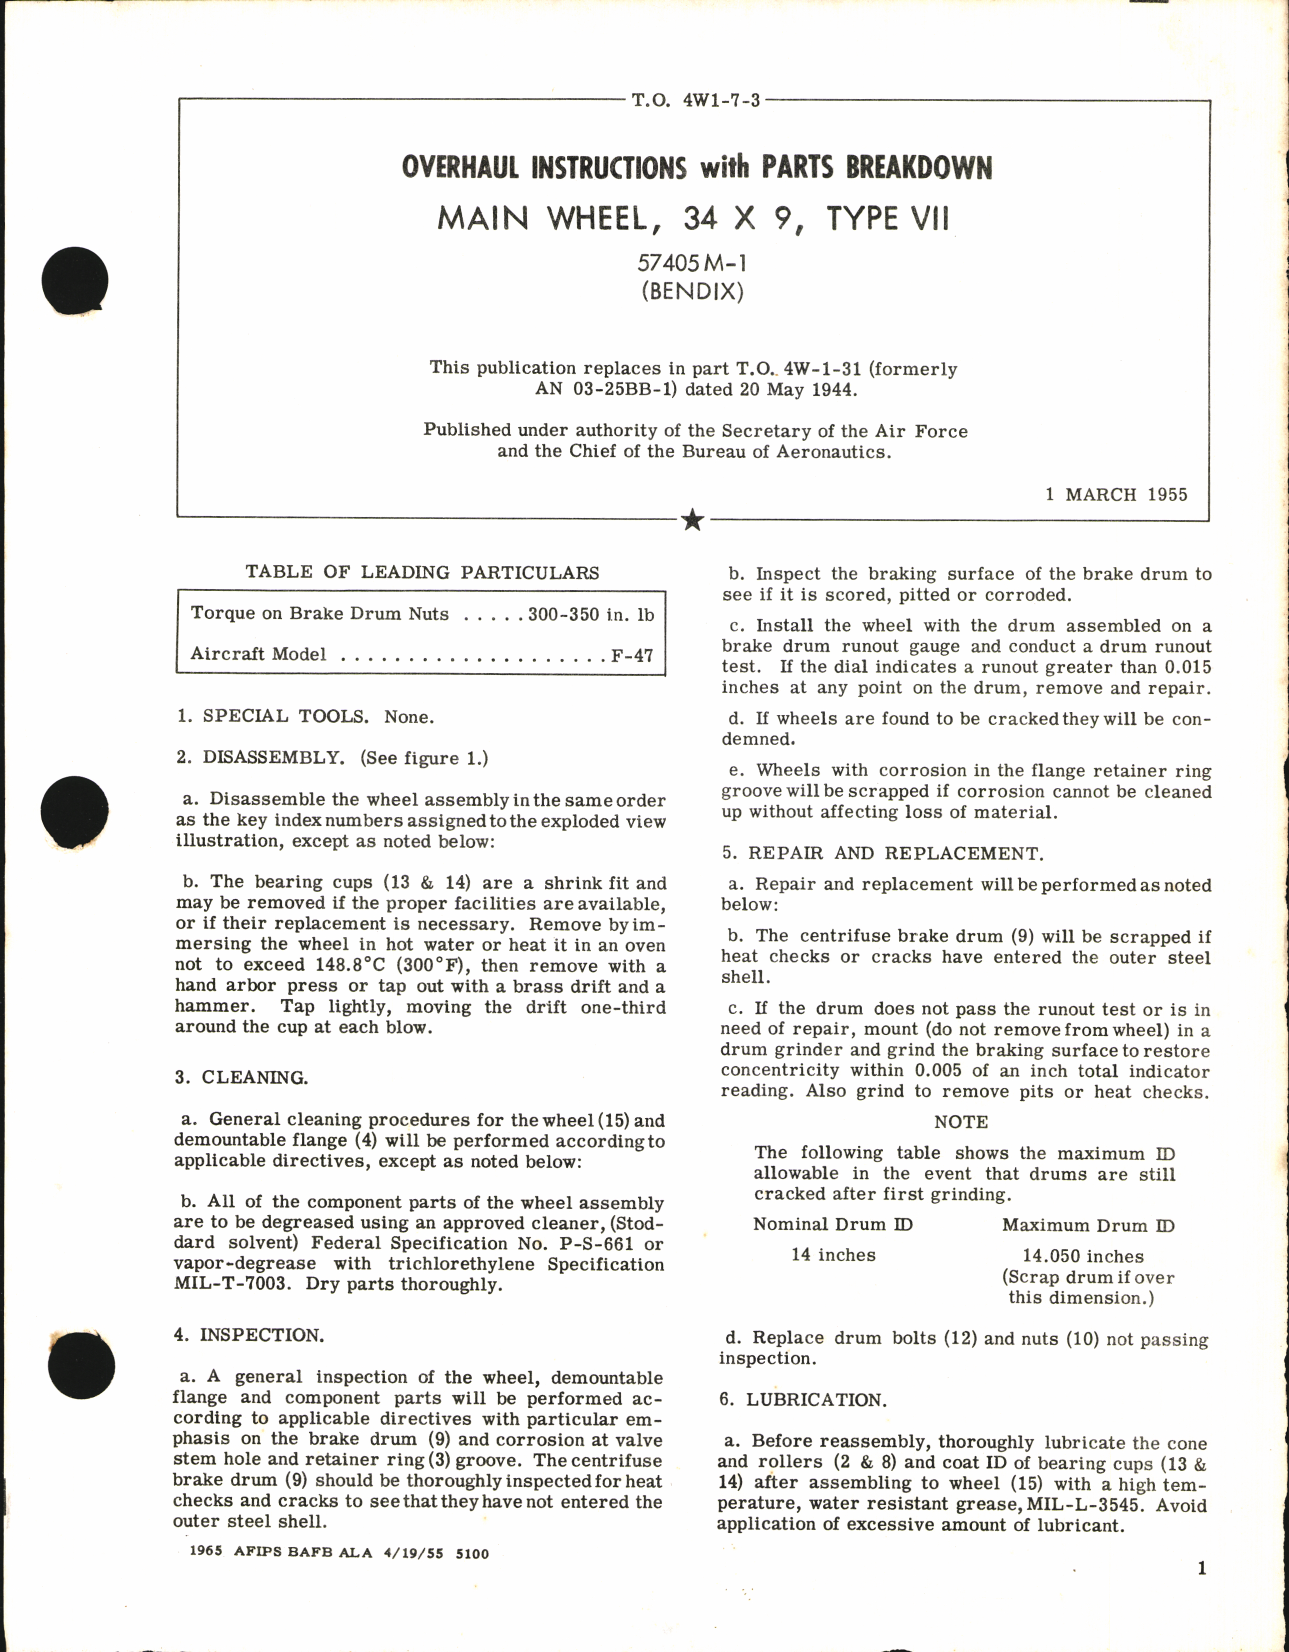 Sample page 1 from AirCorps Library document: Overhaul Instructions with Parts Breakdown for Main Wheel 34 x 9, Type VII